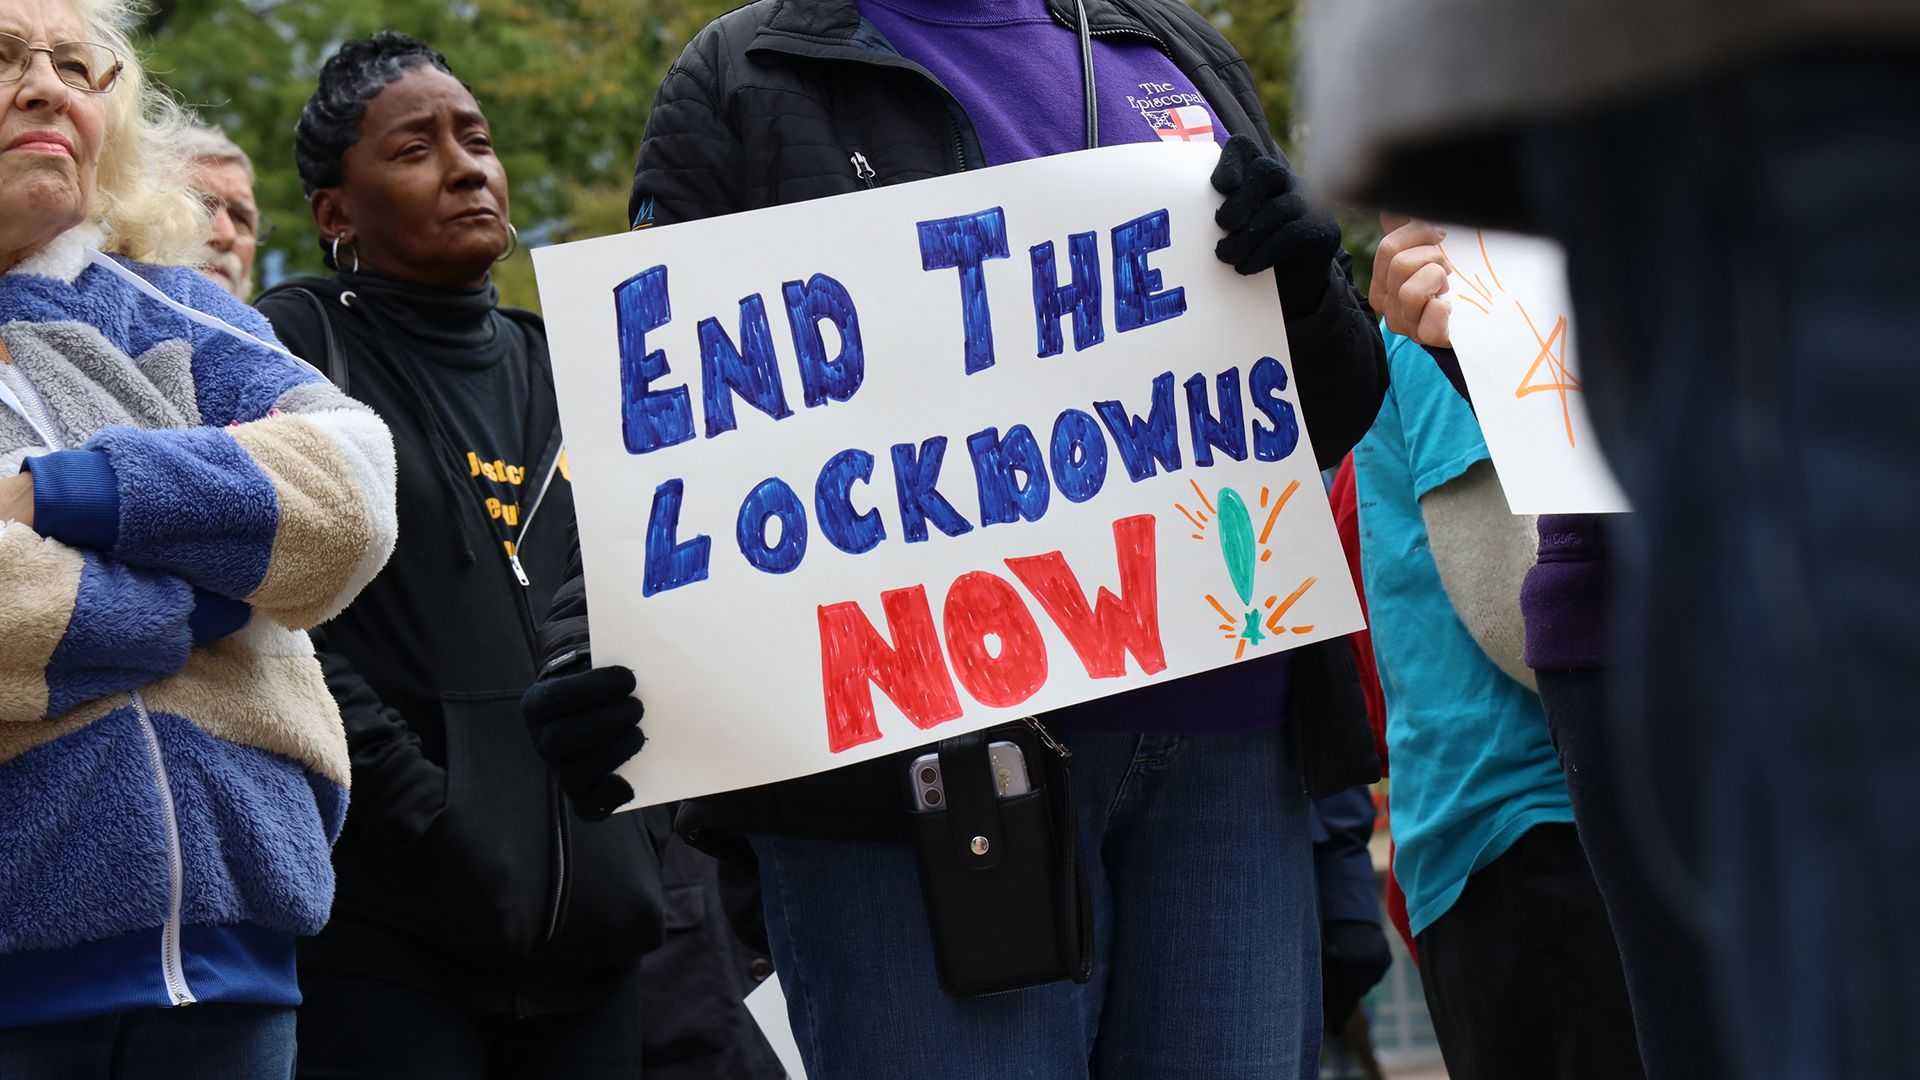 A person holds a hand-drawn sign reading "End the Lockdowns Now!" while standing among a group of people outside.